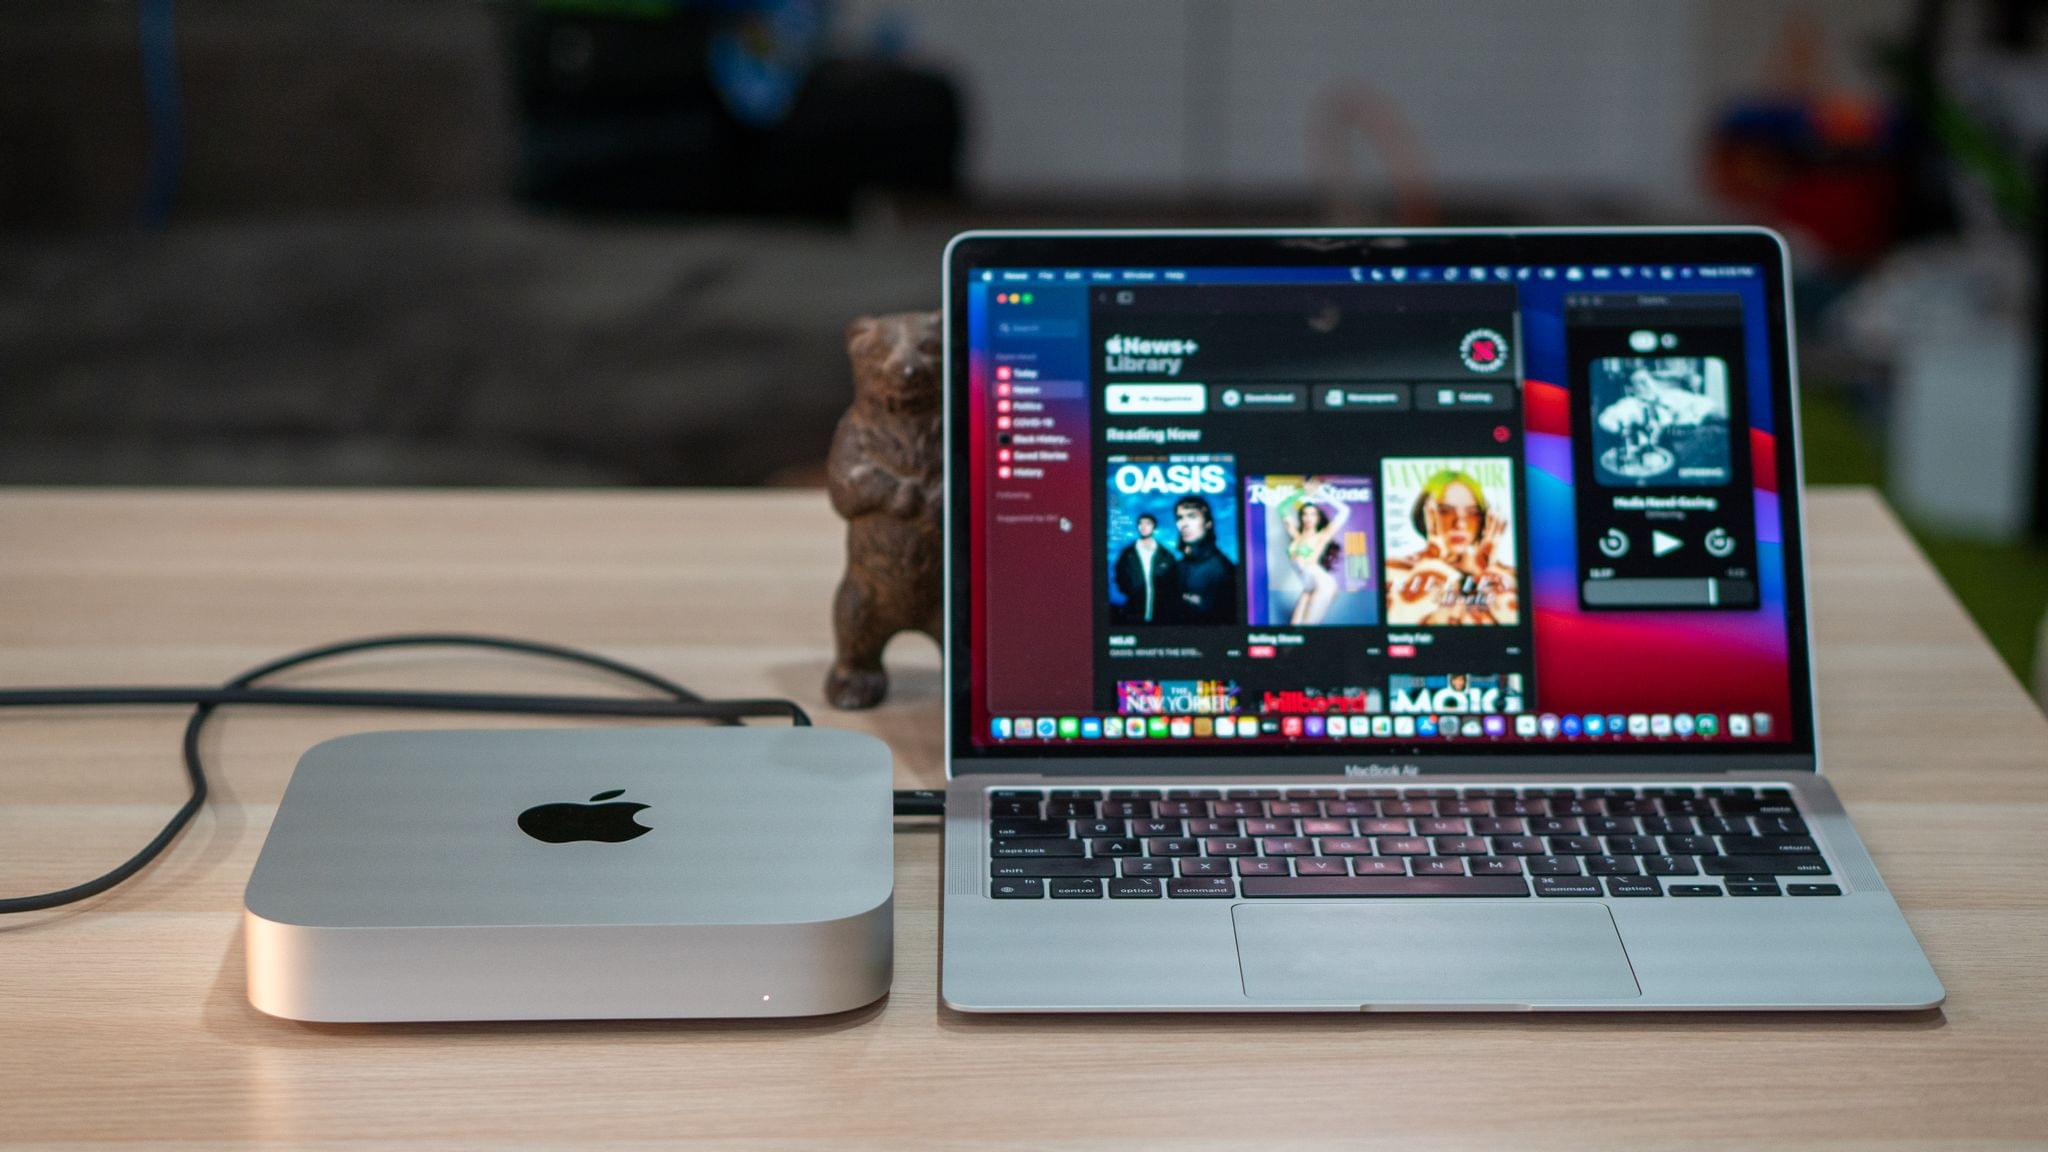 Thunderbolt on the M1 Mac mini – When 2 Actually Does Equal 4